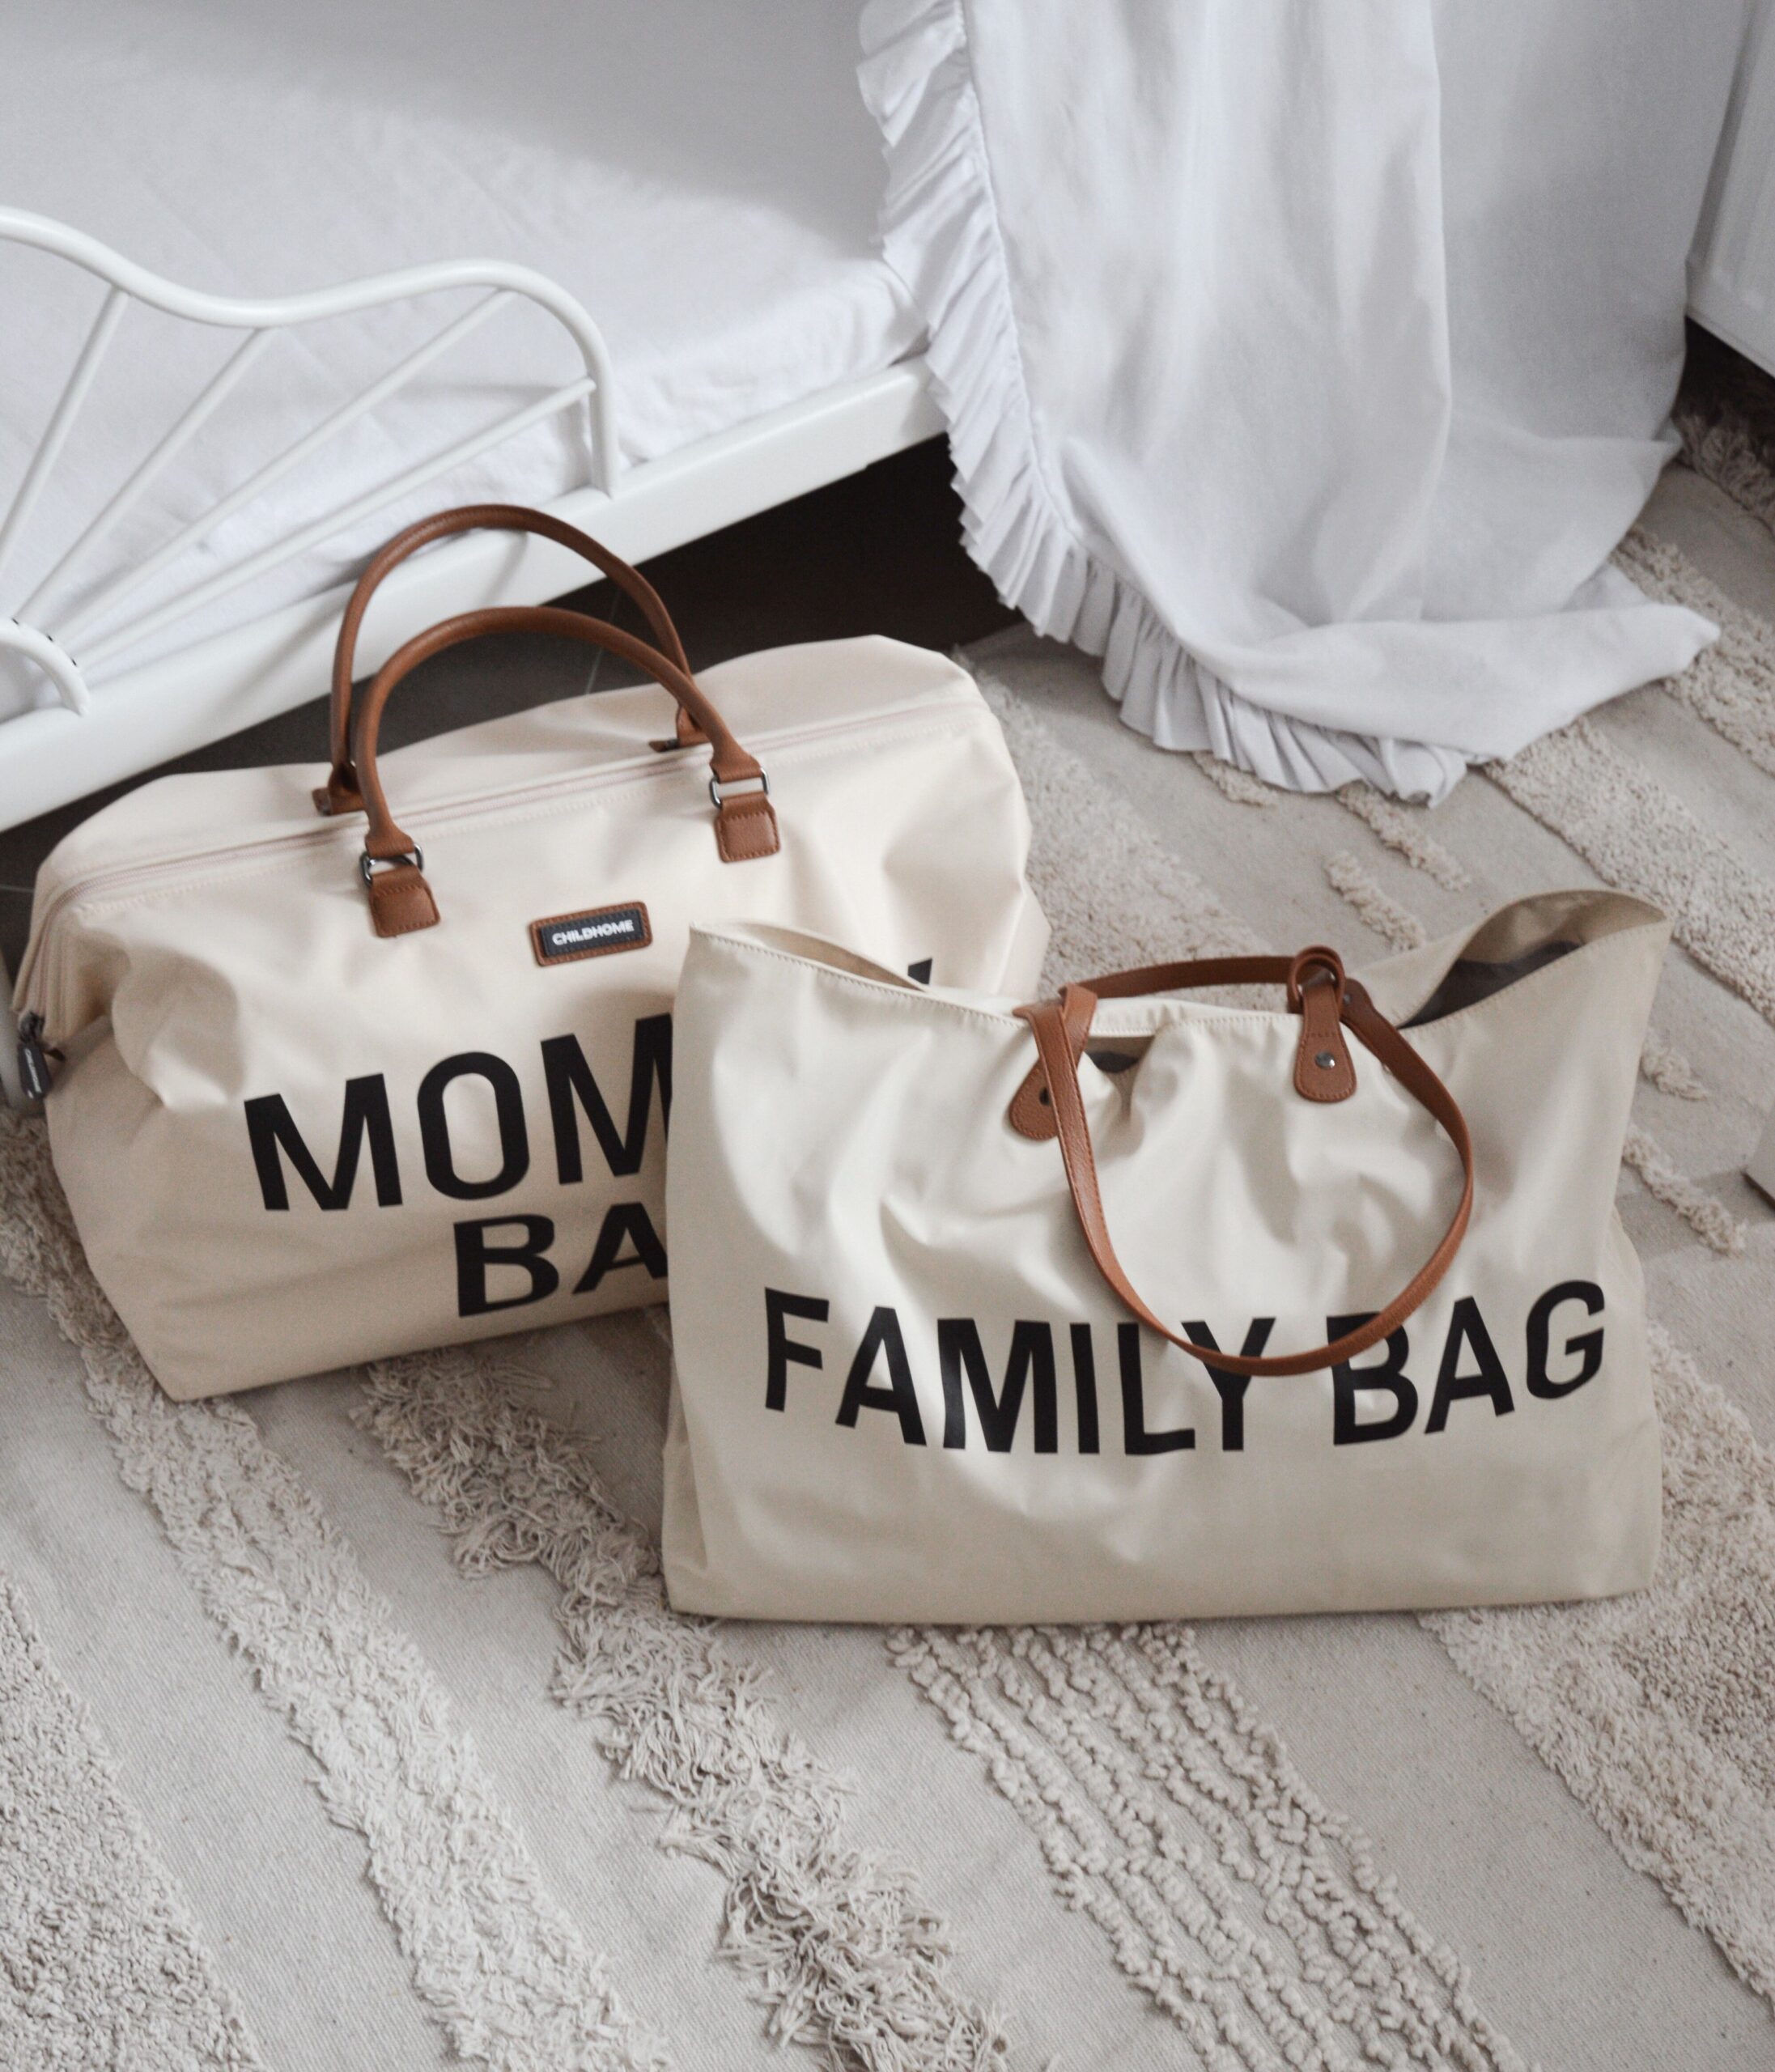 Go crazy with personalized bags